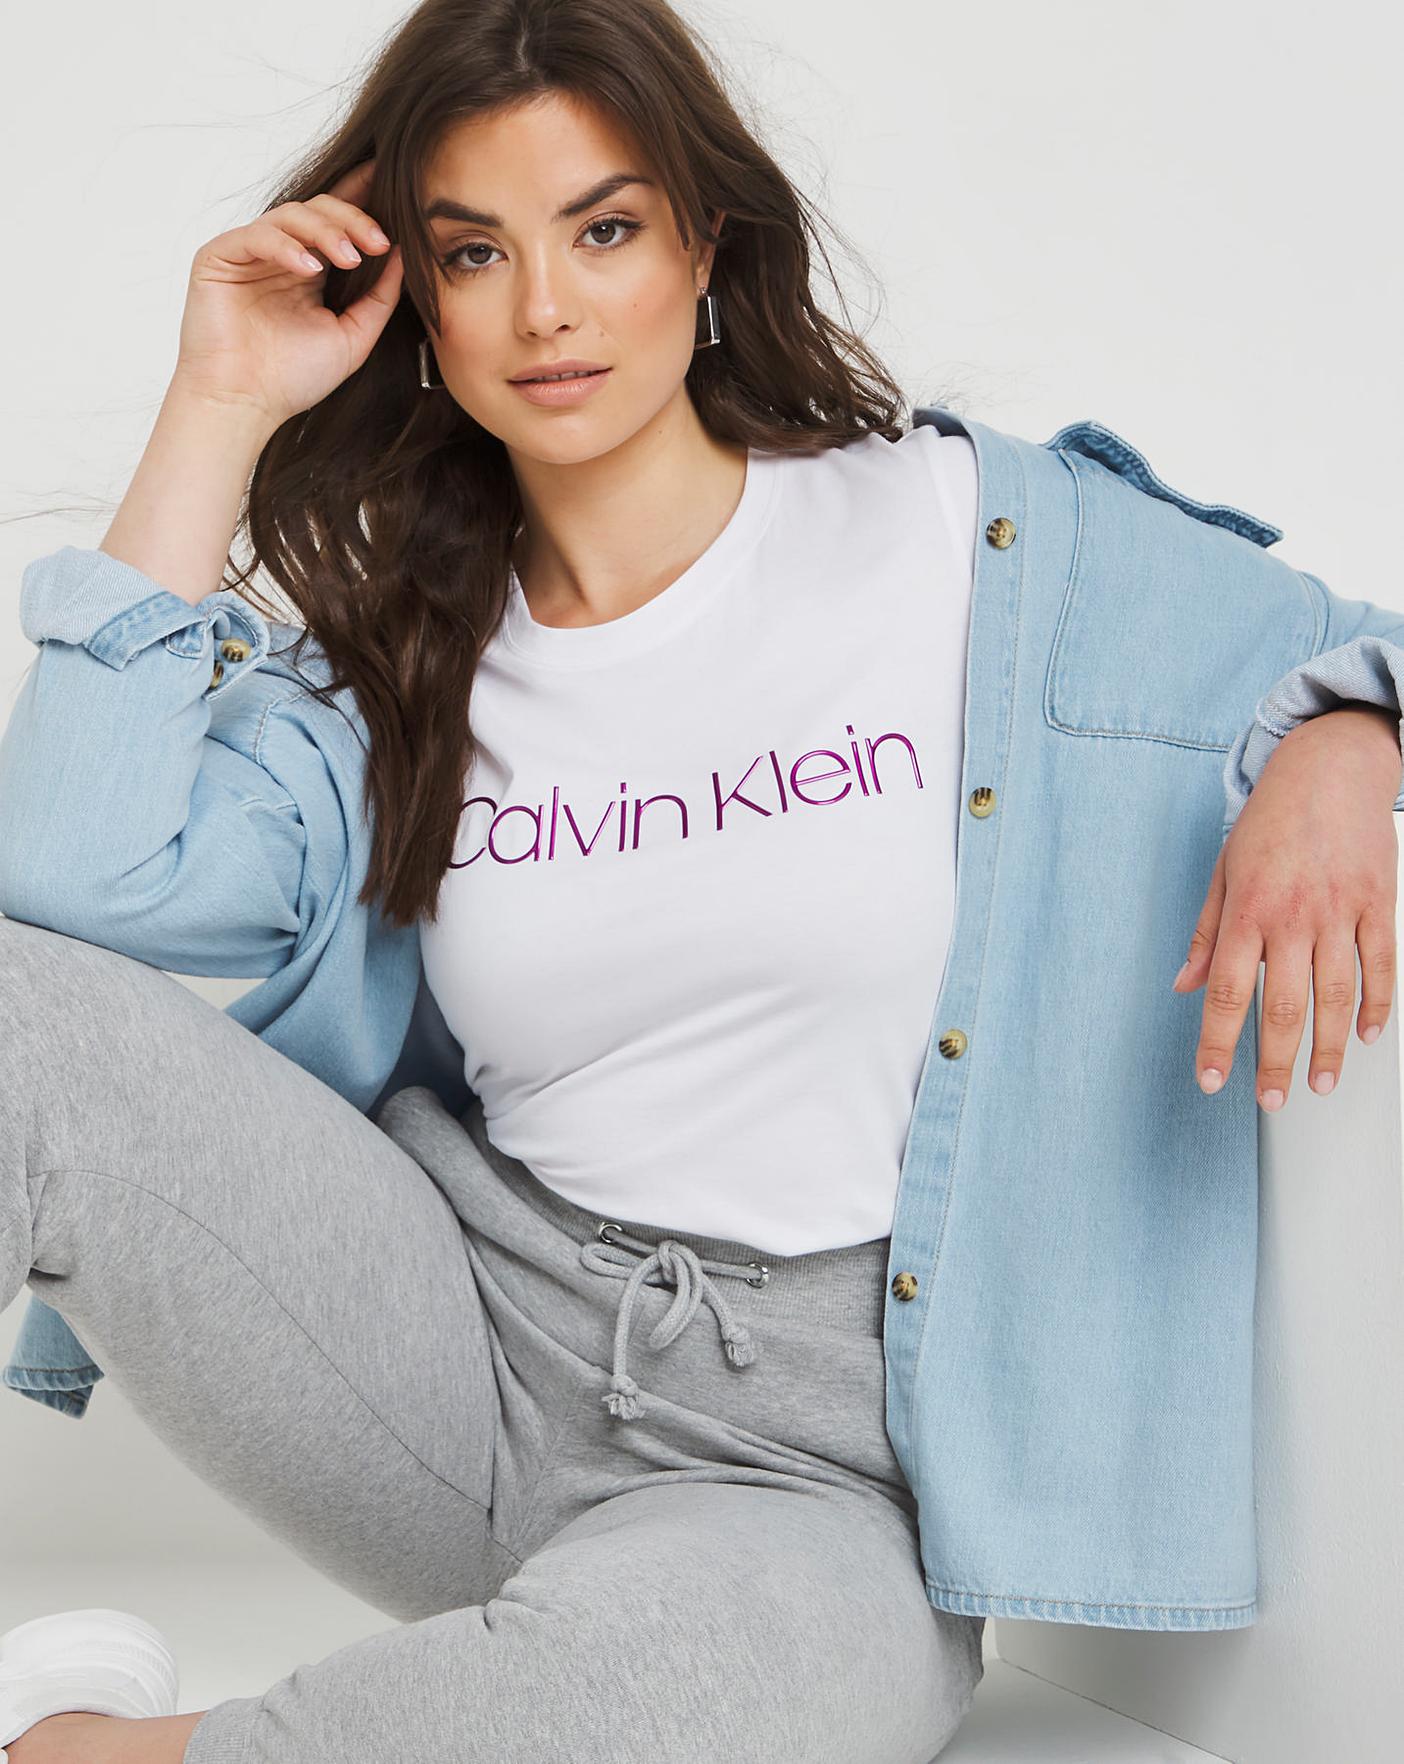 Stay Fashionable with Calvin Klein